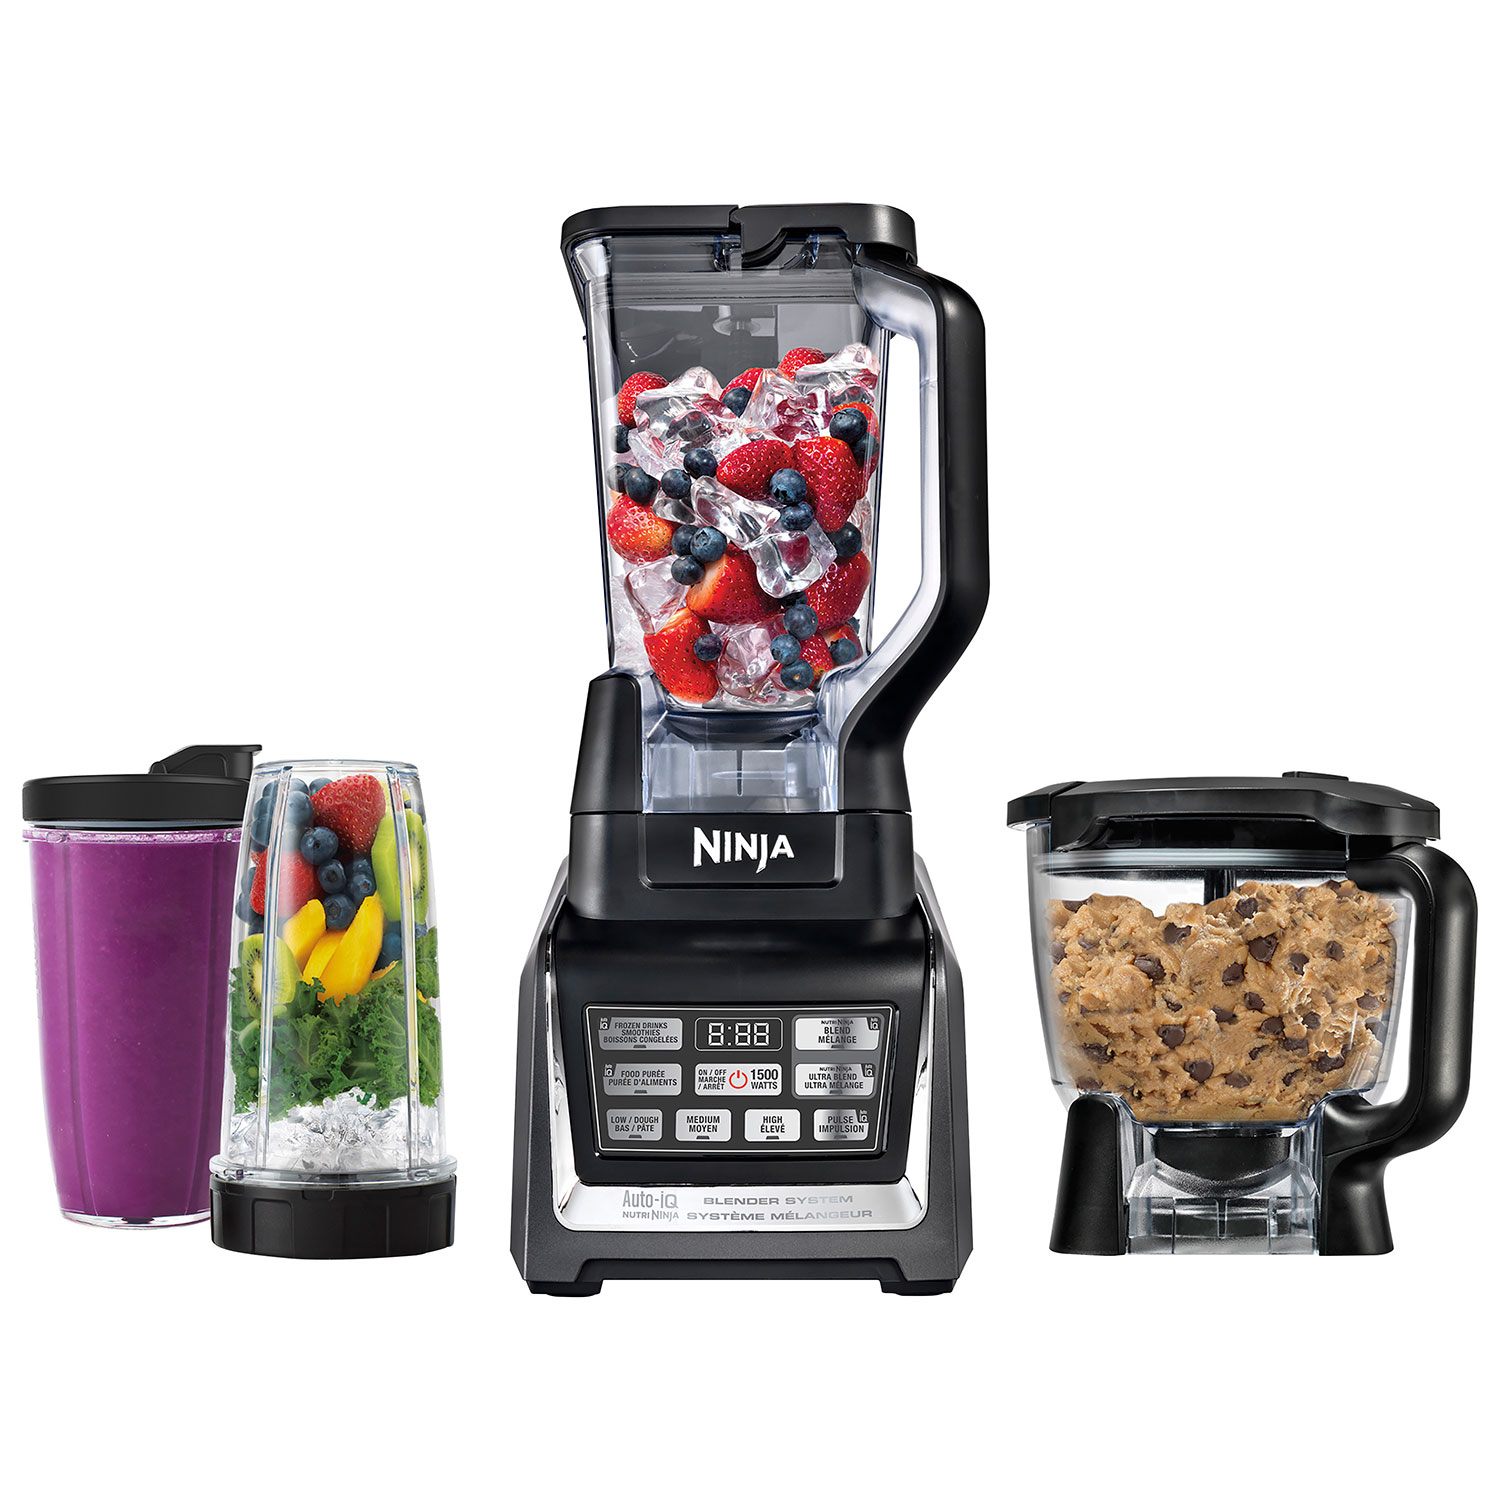 Streng parti Arv How to choose the best blender for you